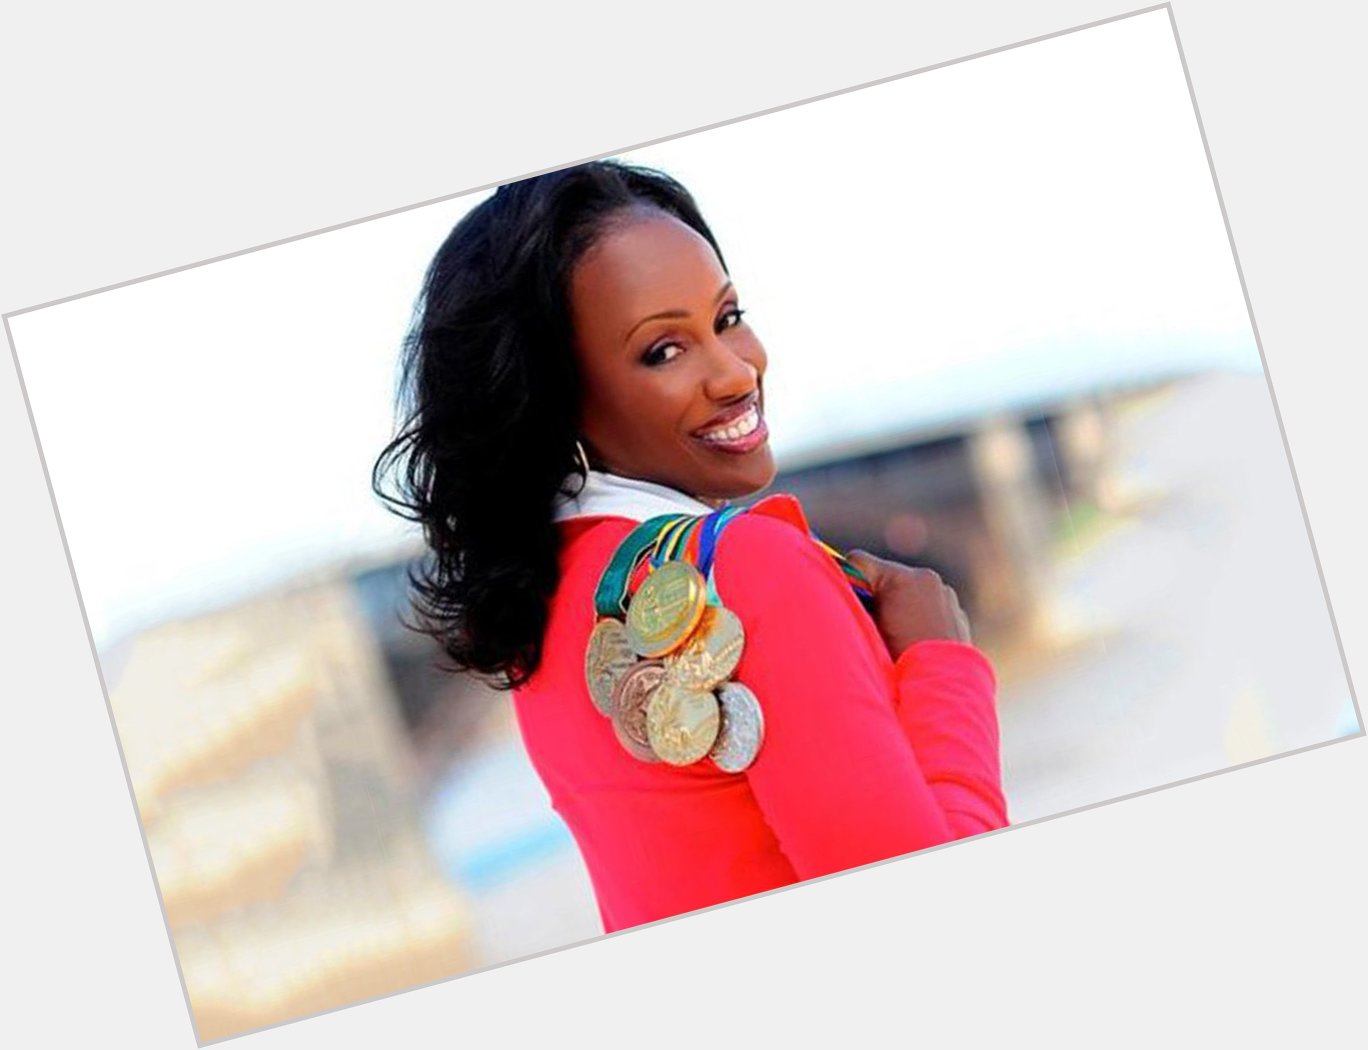 Wishing a very Happy Birthday to one of our Founders, Jackie Joyner-Kersee! 